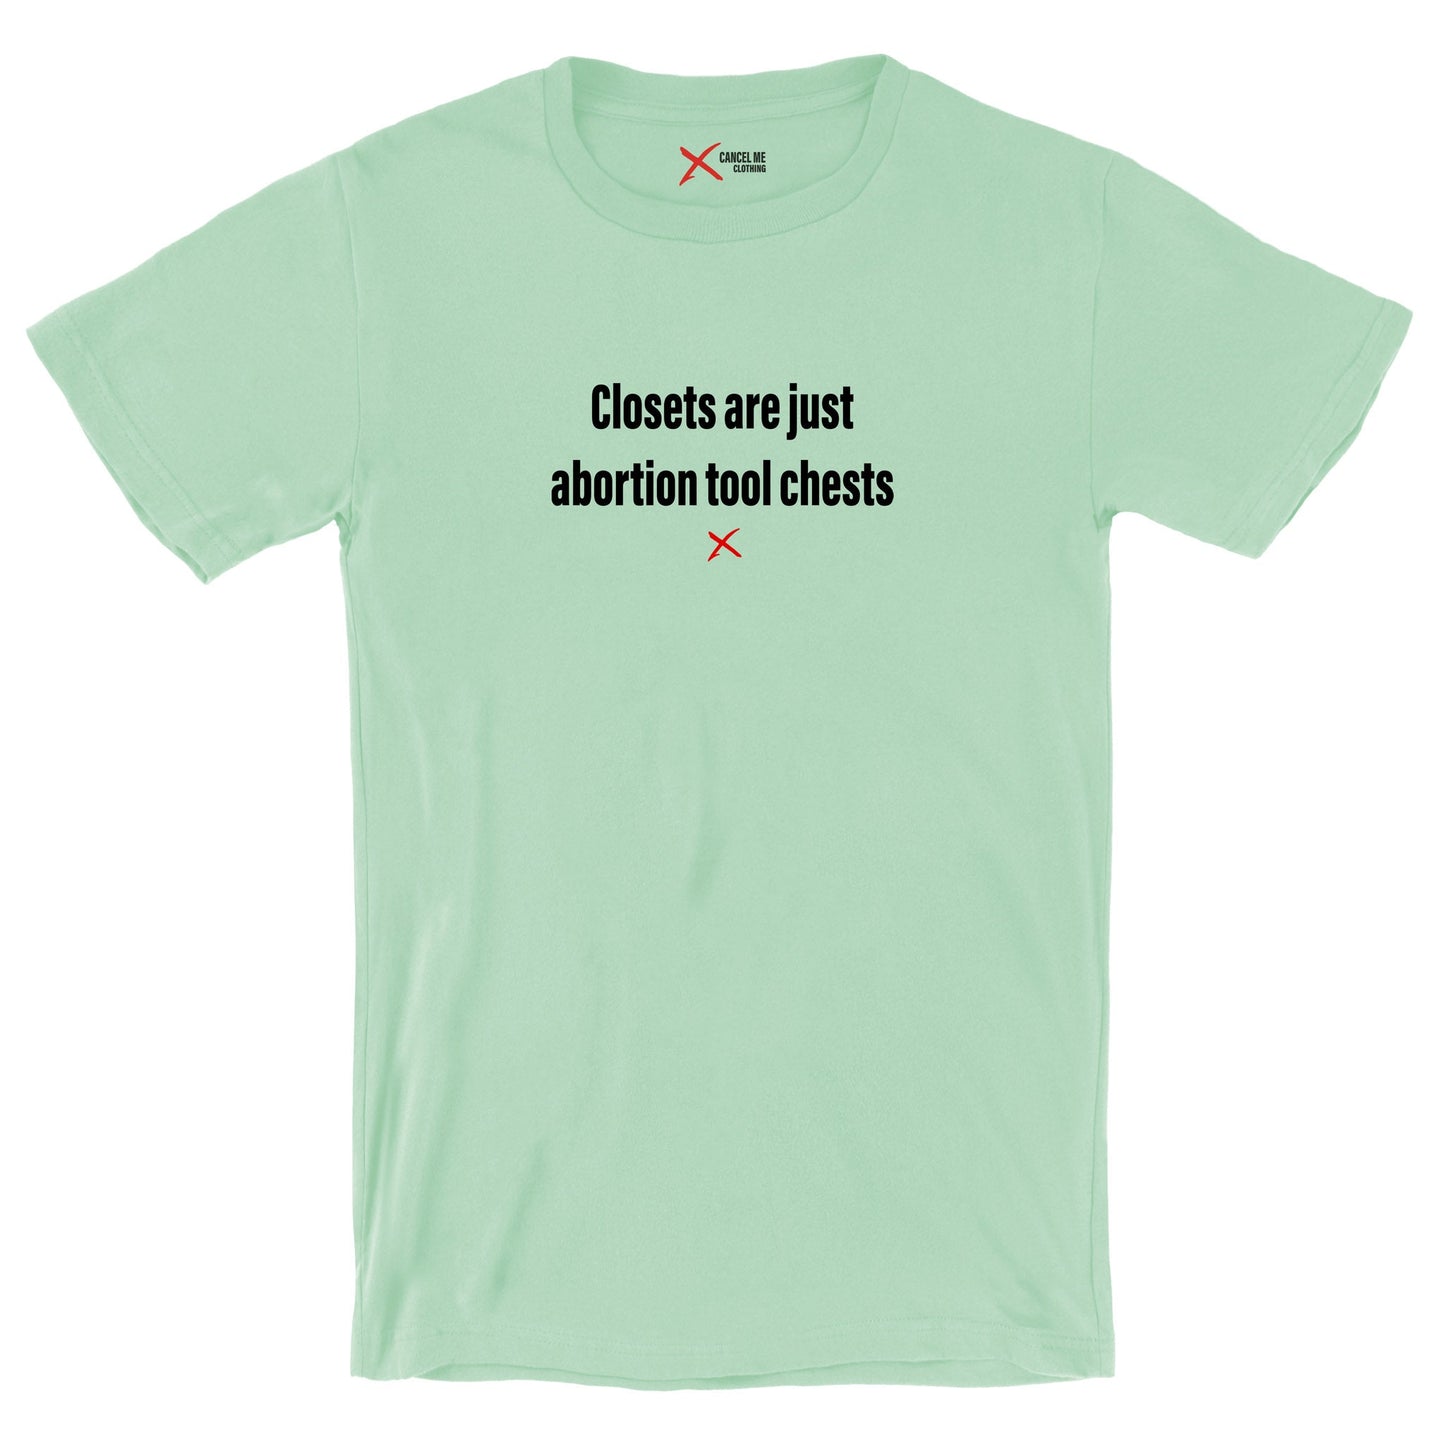 Closets are just abortion tool chests - Shirt